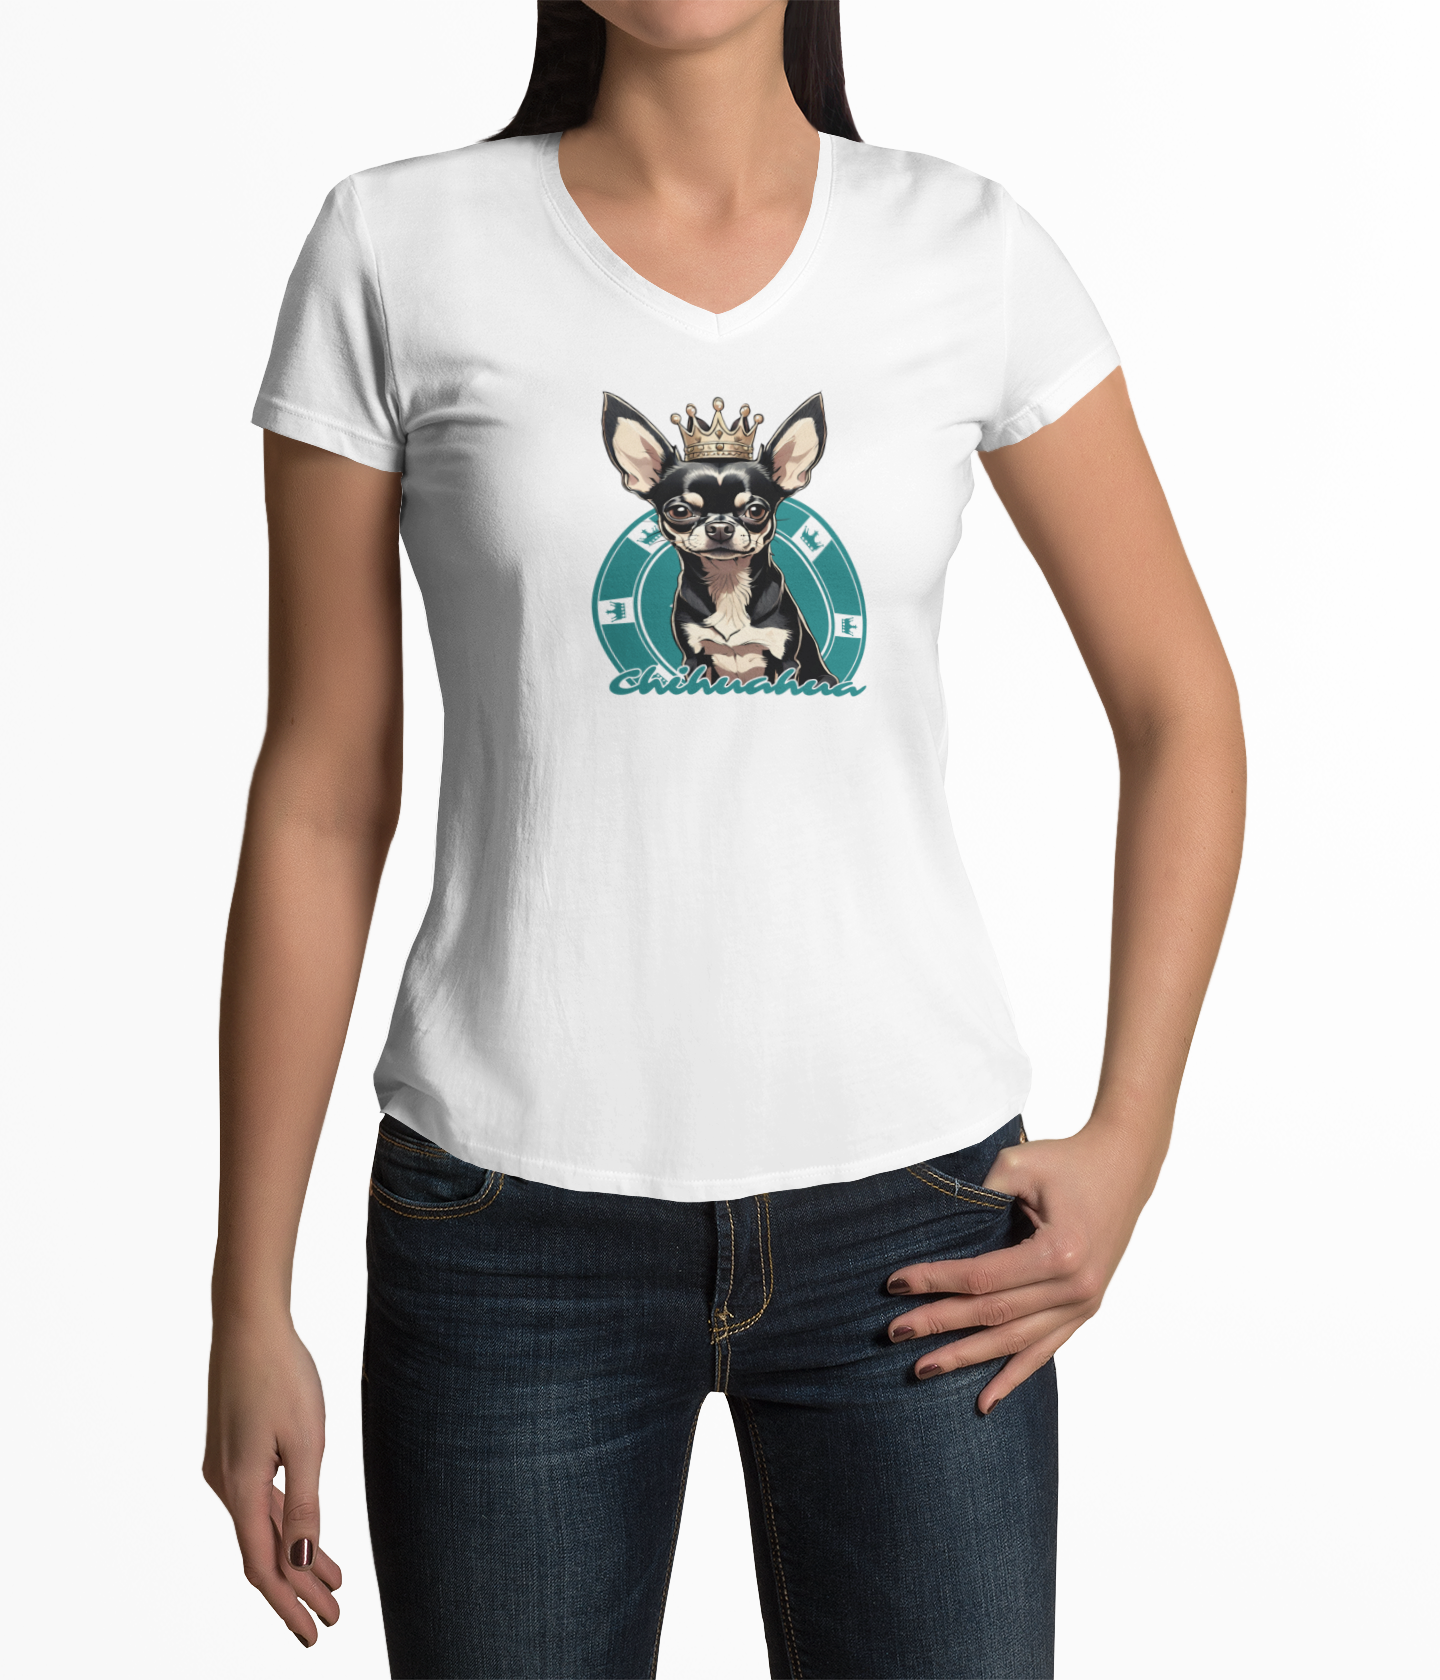 Unisex Jersey Short Sleeve V-Neck Tee with Cute Crowned Chihuahua - Mockup Woman